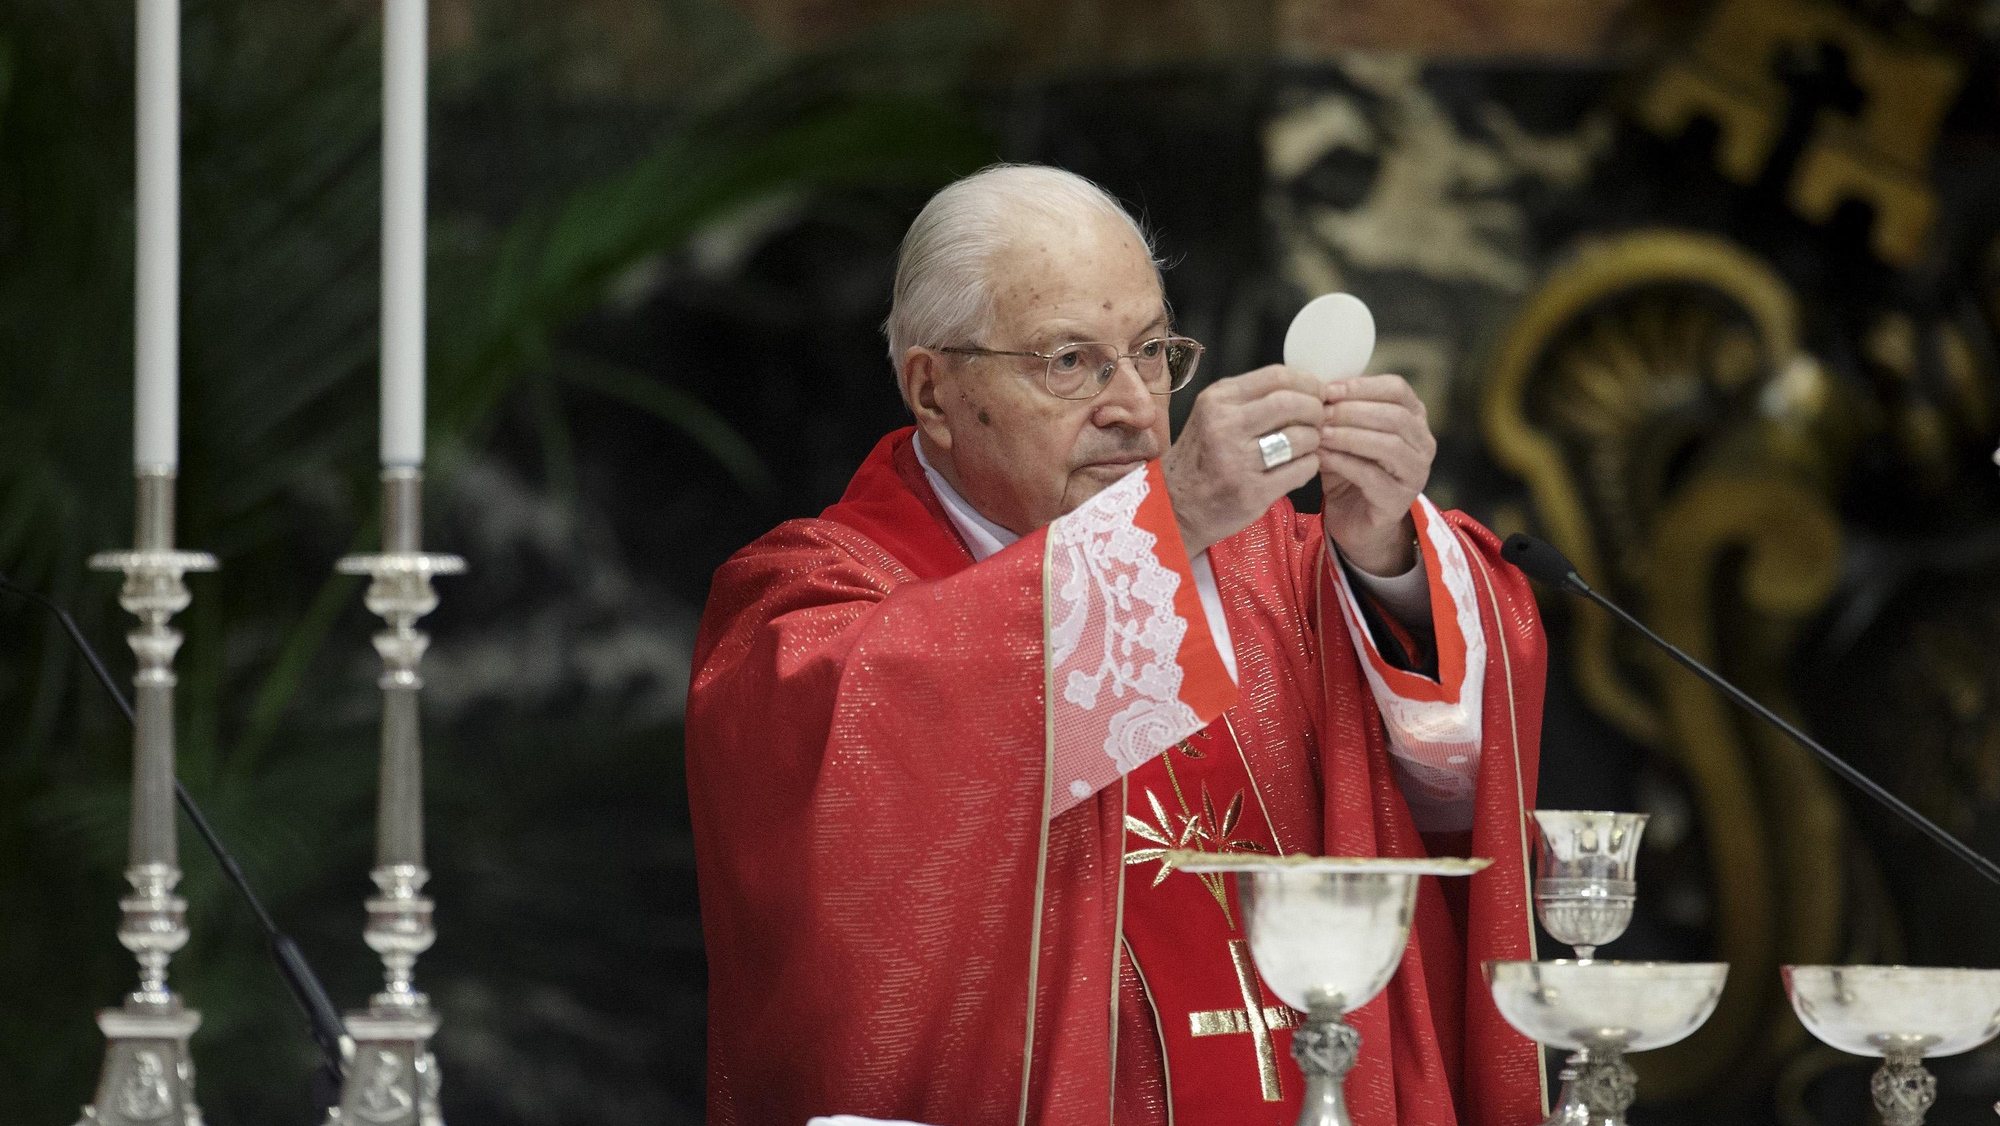 epa06401834 Cardinal Angelo Sodano celebrates the funeral ceremony for Cardinal Bernard Francis Law in St. Peter&#039;s Basilica, Vatican, 21 December 2017. Cardinal Bernard Law died at the age of 86 in Rome, Italy. Law was an influential figure in the US Catholic church, but fell from grace after a 2002 media report revealed that Law shuffled priest accused of sexual abuse from parish to parish for years without alerting law enforcement authorities or the families of the abused. The fallout resulted in Law&#039;s eventual resignation.  EPA/Donatella Giagnori